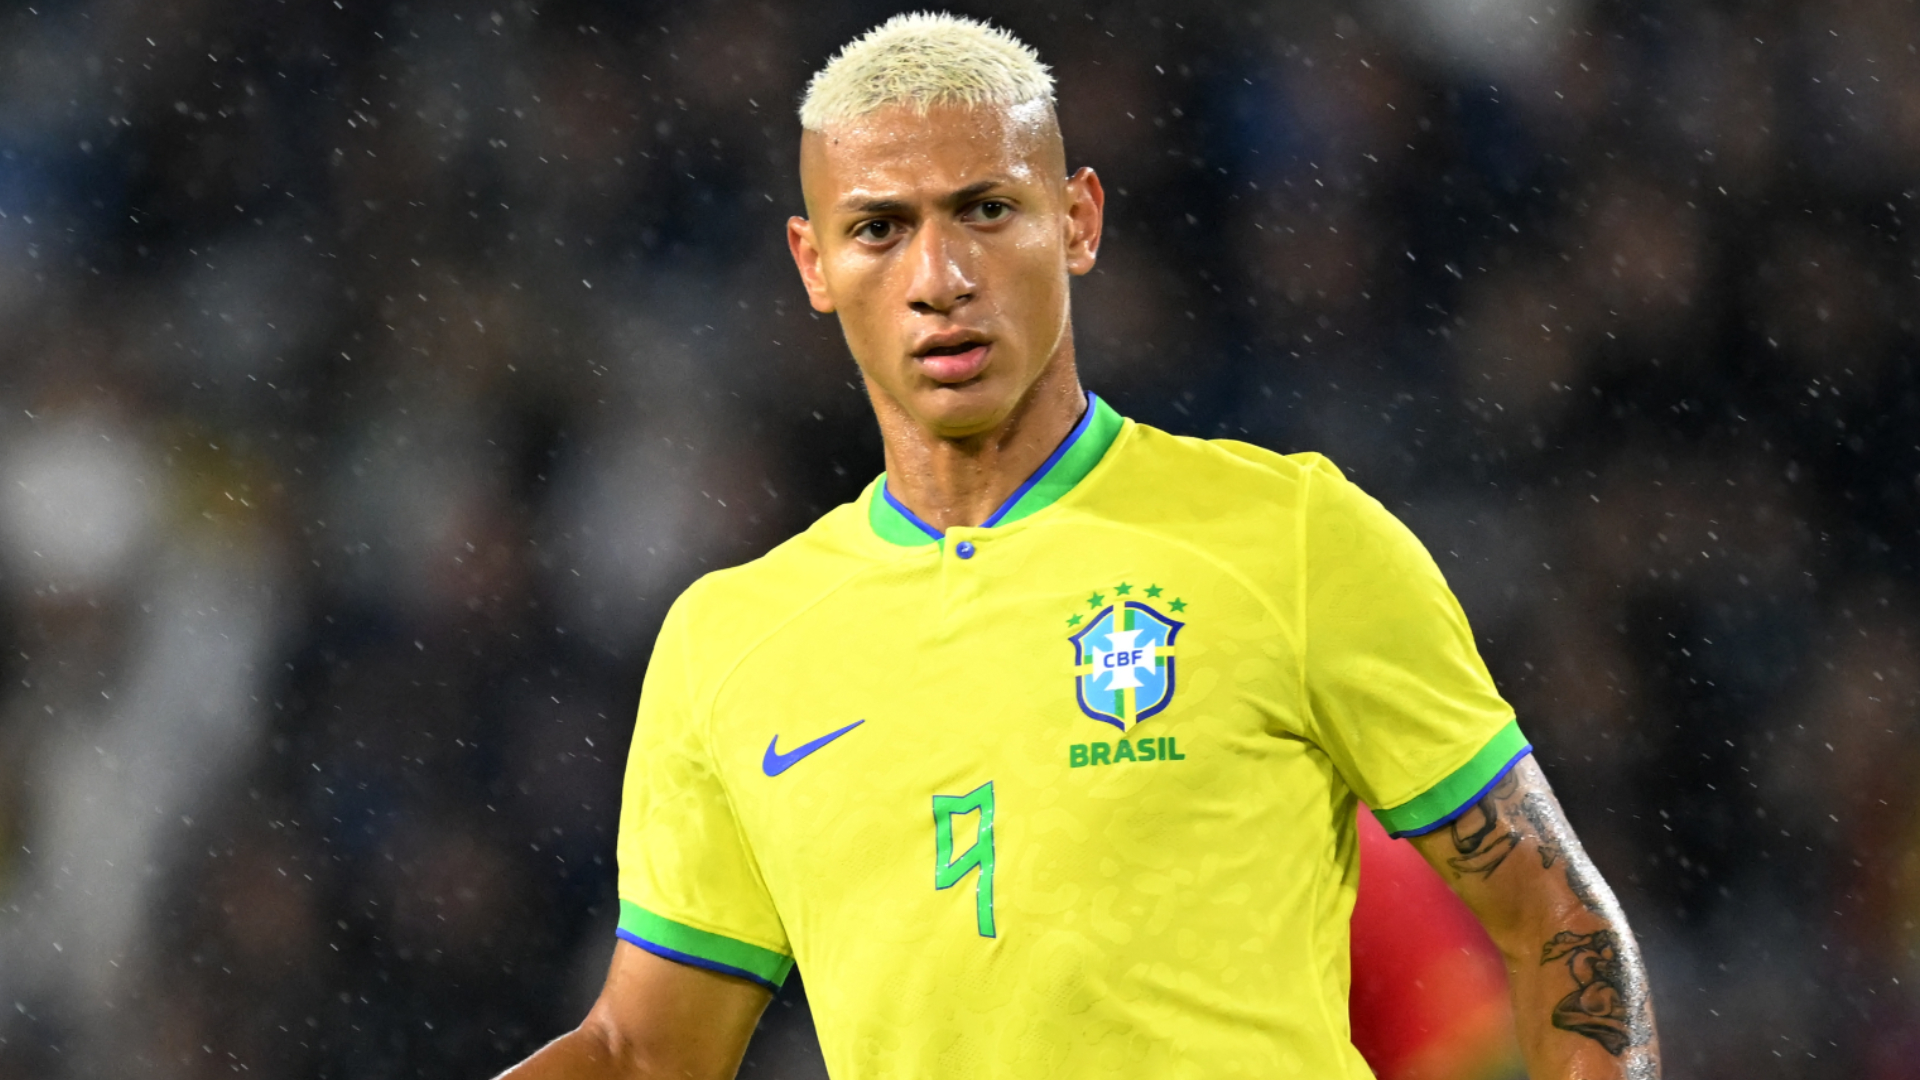 cool 30 Awesome Soccer Player Haircuts - Inspirational Role Models Check  more at http://machohairstyles.com/soccer-haircut… | Neymar, Neymar jr,  Neymar jr hairstyle